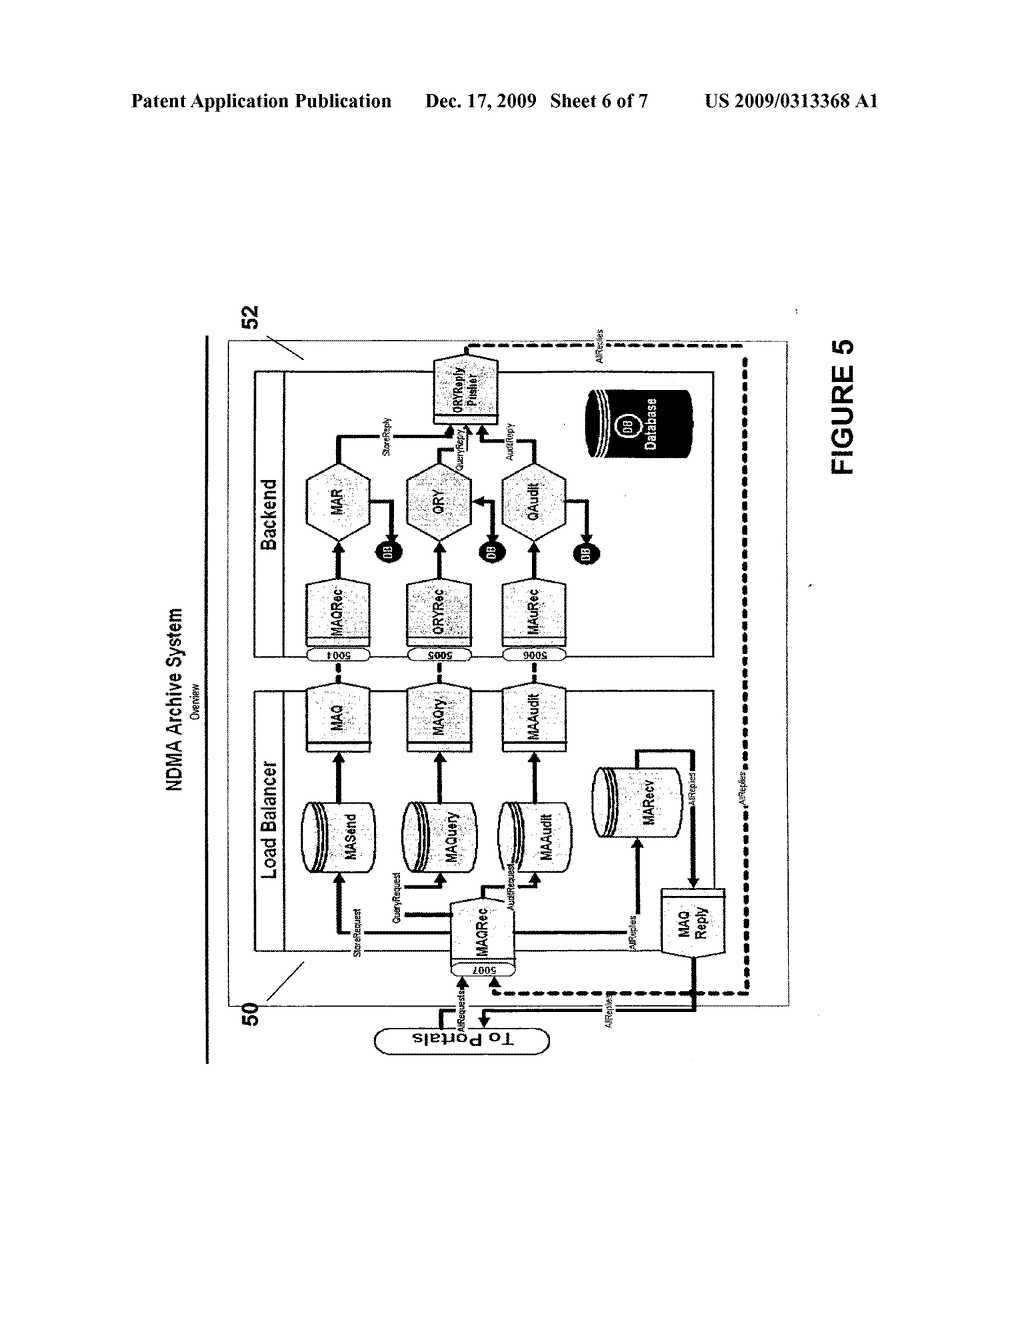 CROSS-ENTERPRISE WALLPLUG FOR CONNECTING INTERNAL HOSPITAL/CLINIC IMAGING SYSTEMS TO EXTERNAL STORAGE AND RETRIEVAL SYSTEMS - diagram, schematic, and image 07